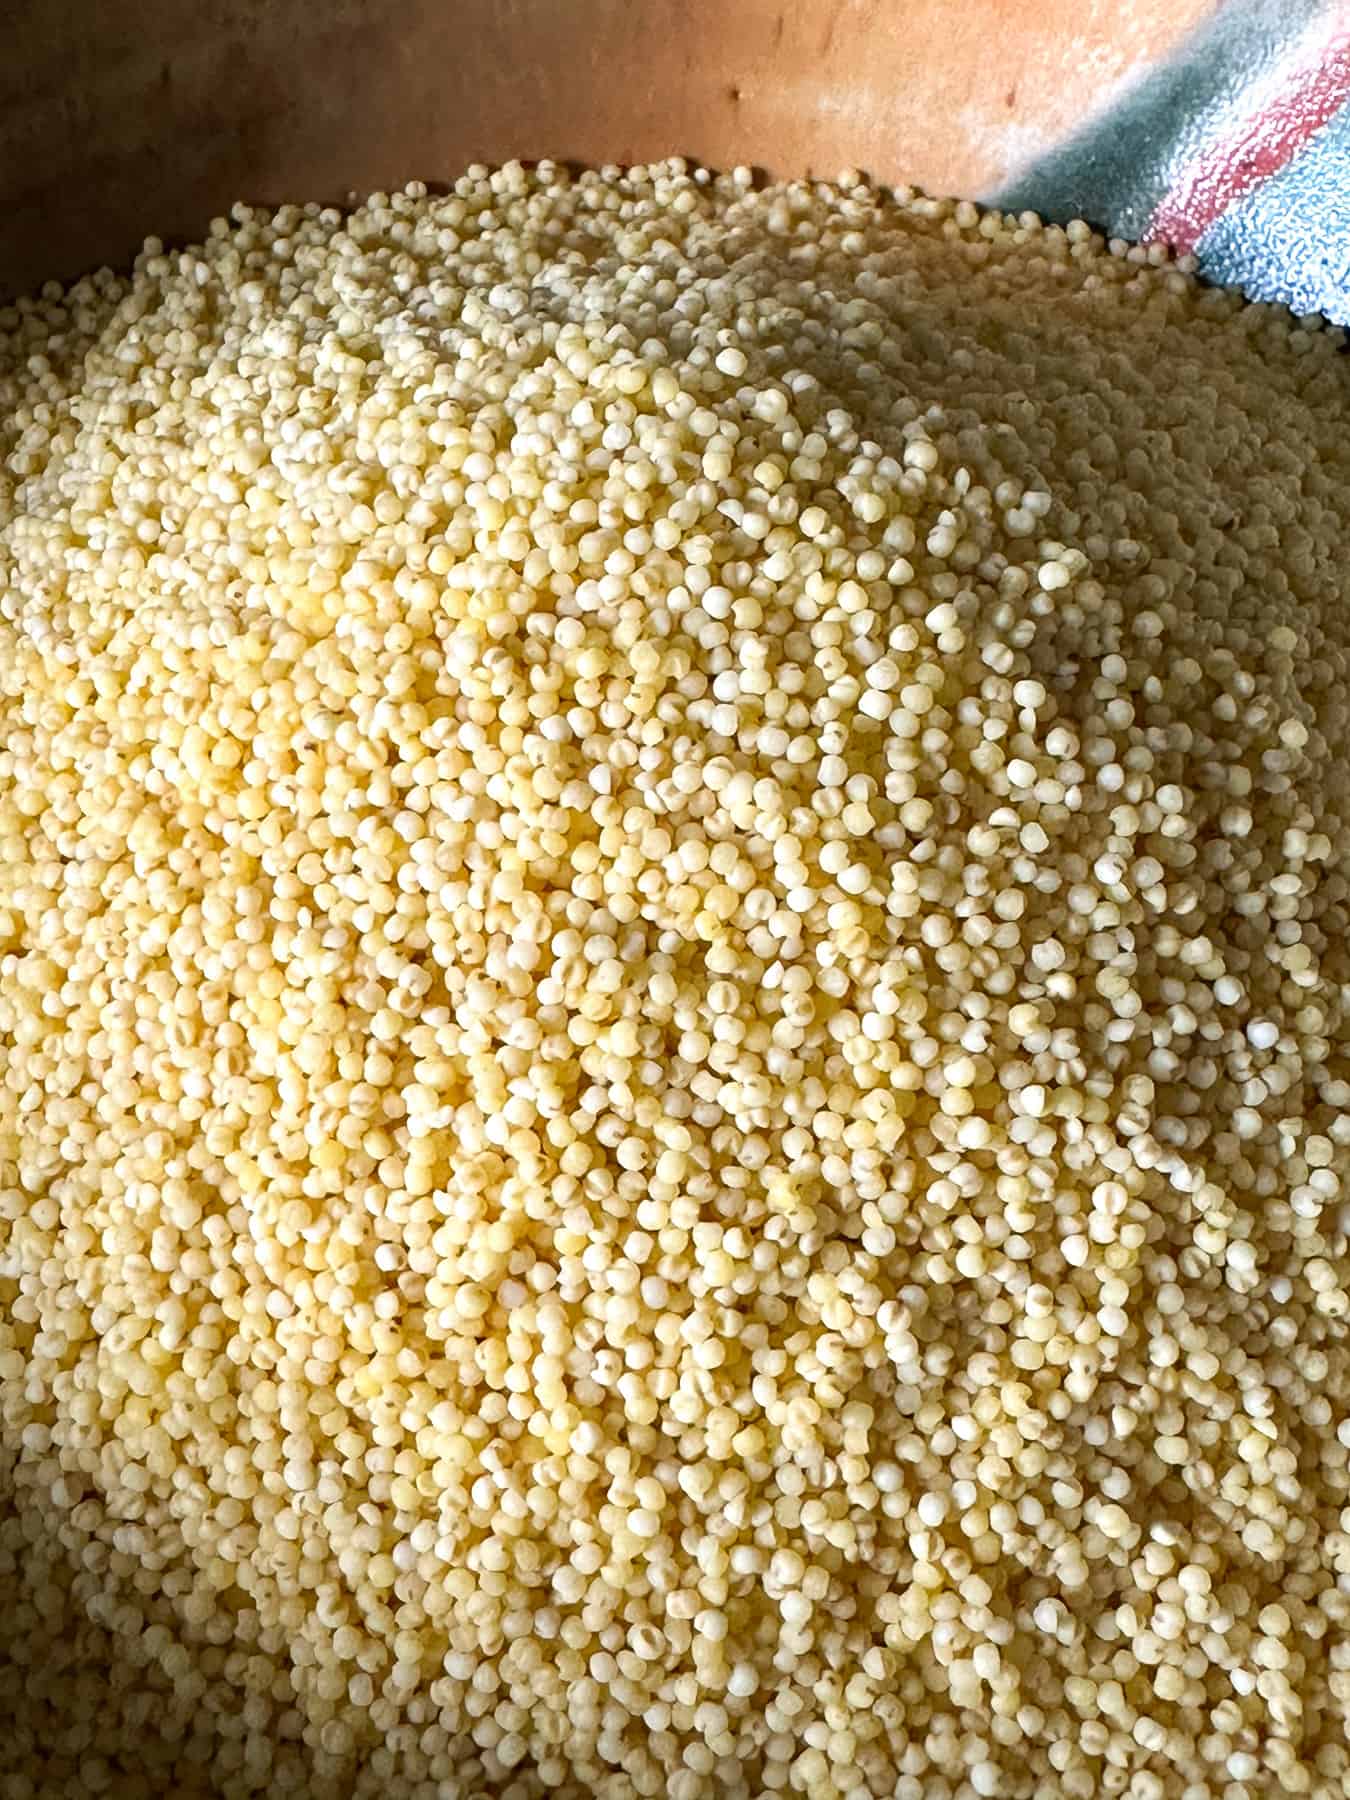 Foxtail millet in a bowl.